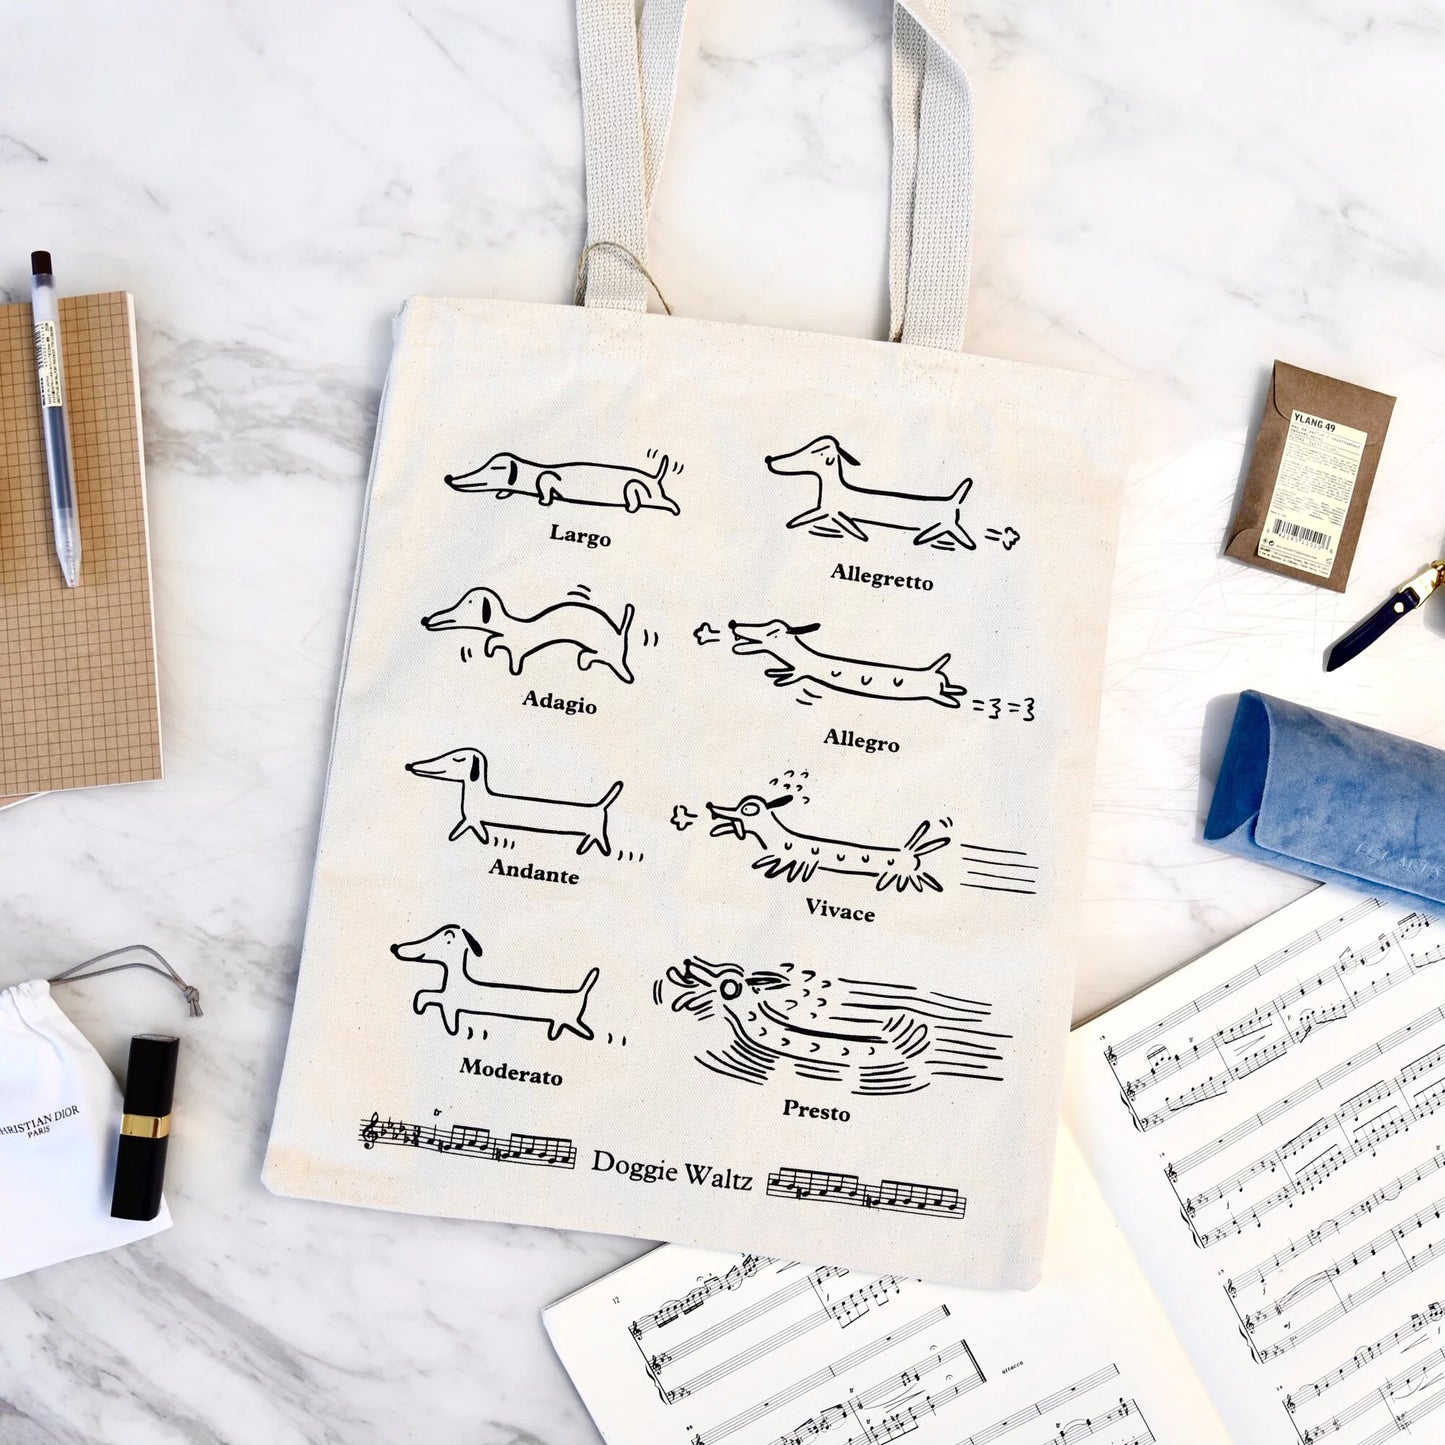 Dog Musical Terminology Tote Bag – KGH Music Group